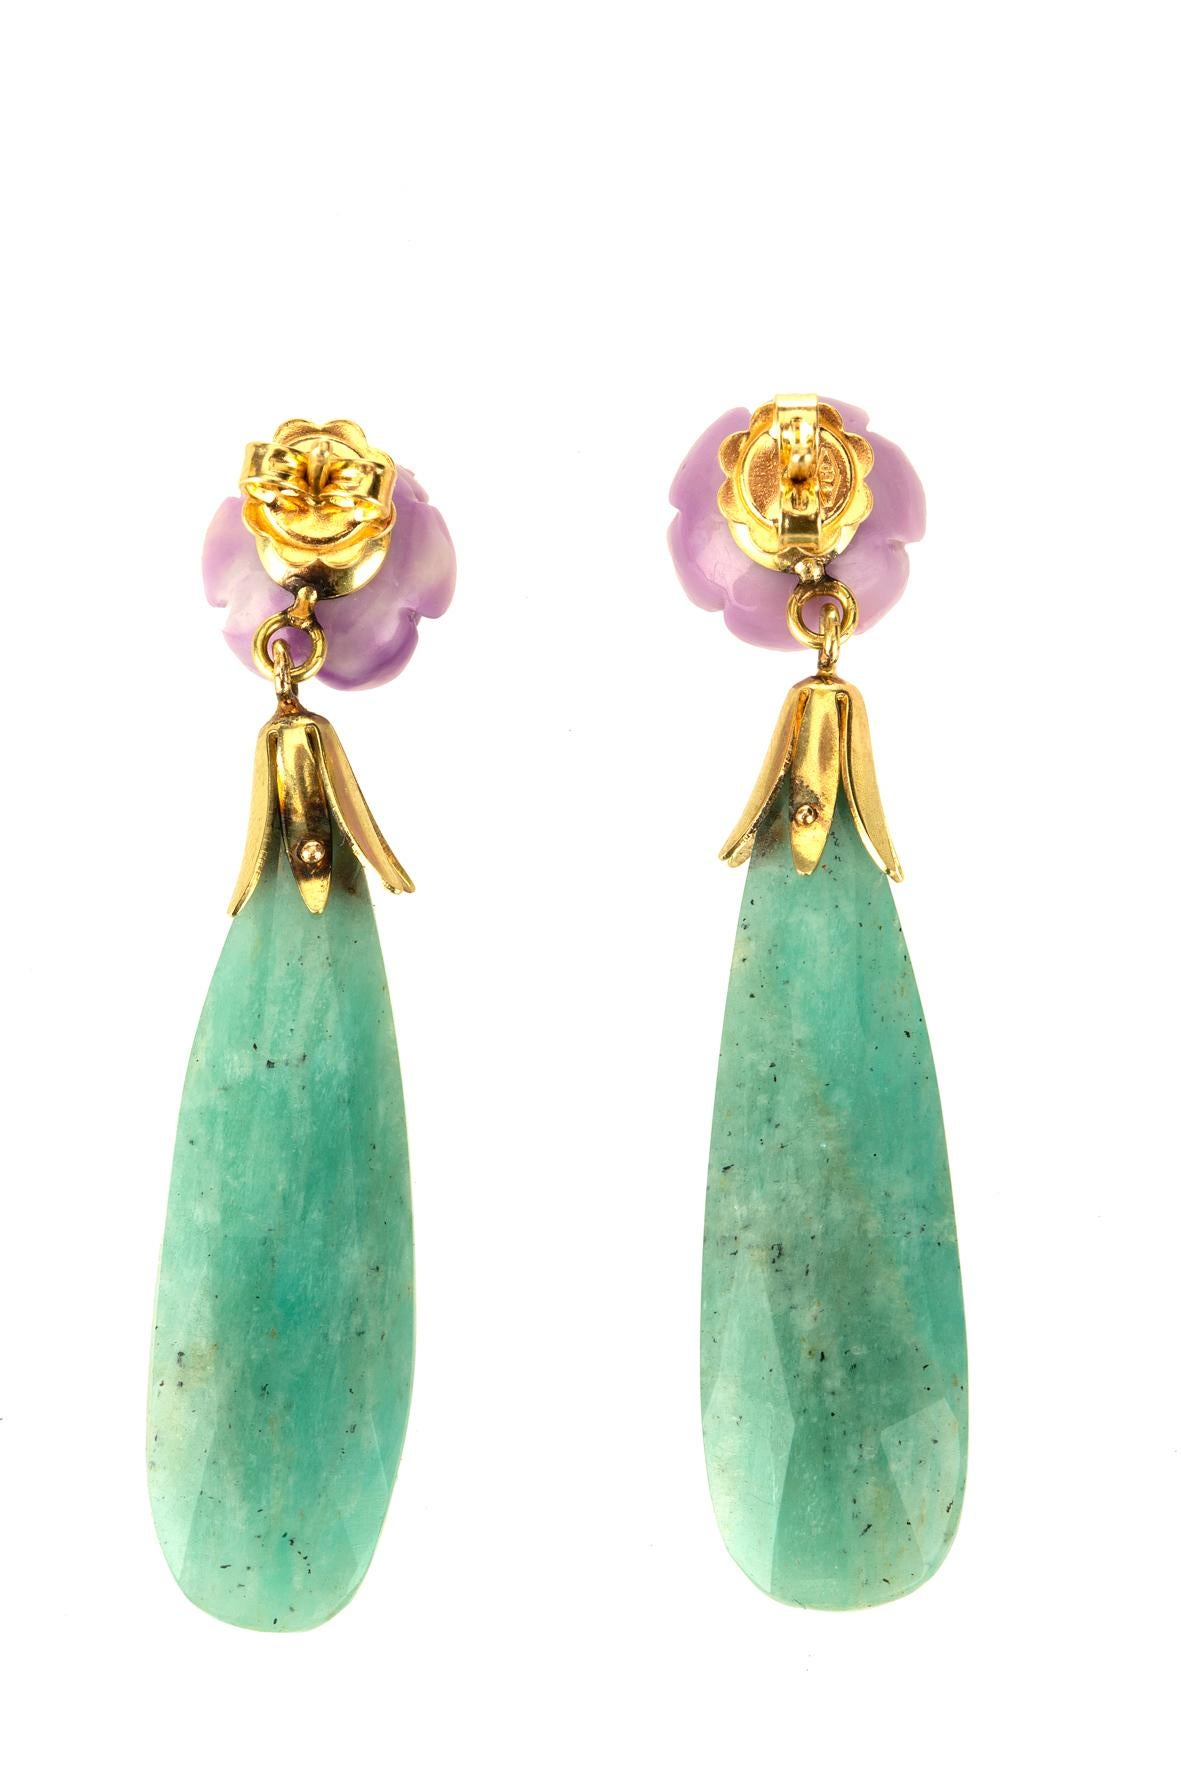 Opal carved lotus flower and amazzonite faced drops, 18 kt gold gr. 4,80 earrings.
All Giulia Colussi jewelry is new and has never been previously owned or worn. Each item will arrive at your door beautifully gift wrapped in our boxes, put inside an